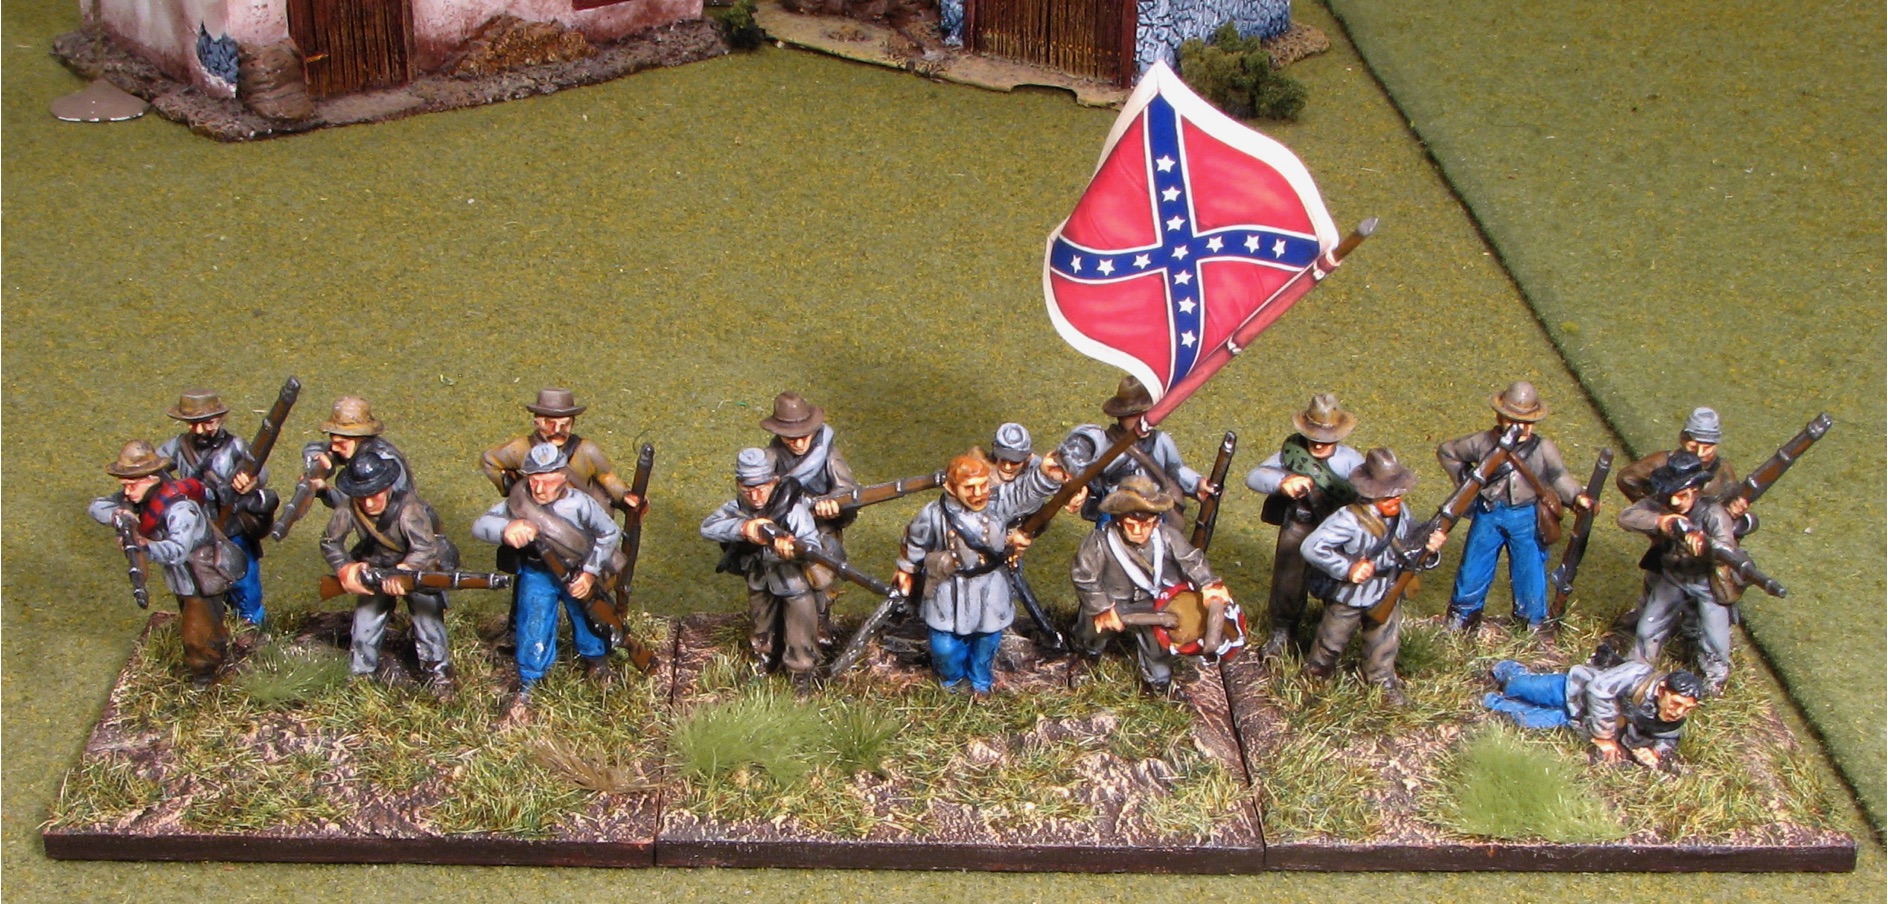 Perry Miniatures: American Civil War Confederate Infantry 1861-65